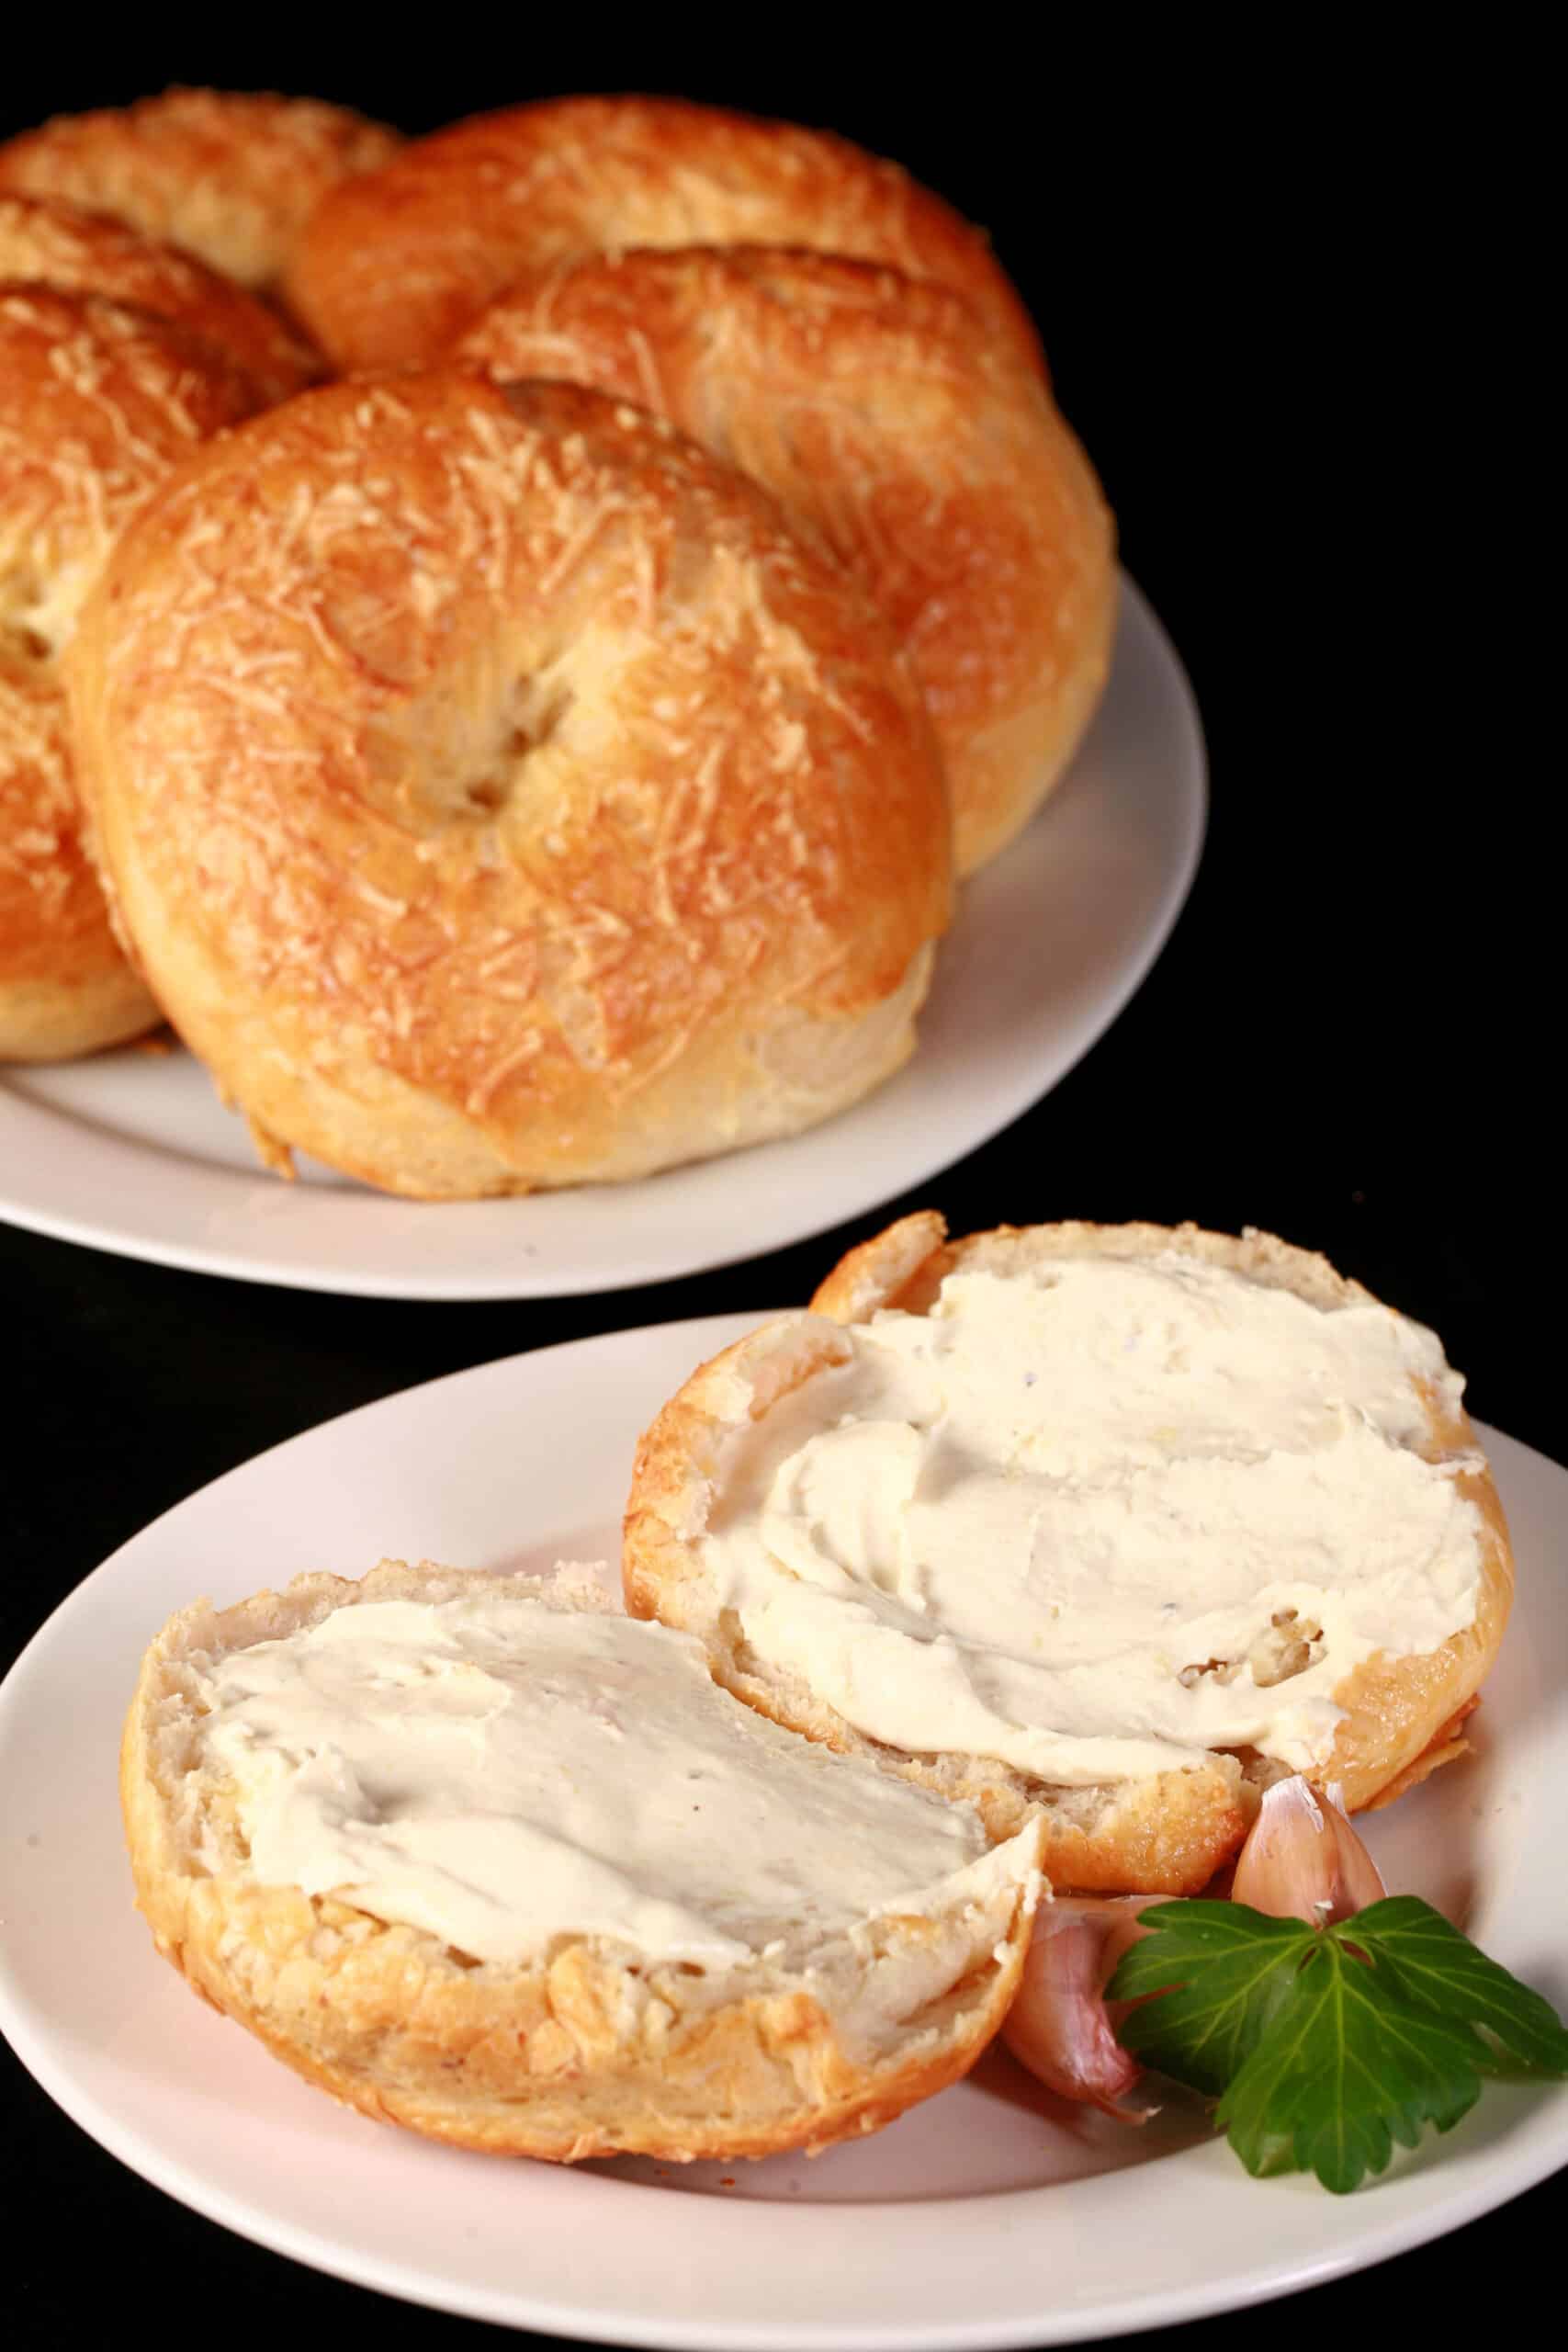 A split open roasted garlic asiago cheese bagel with cream cheese on it in front of a plate of asiago bagels.